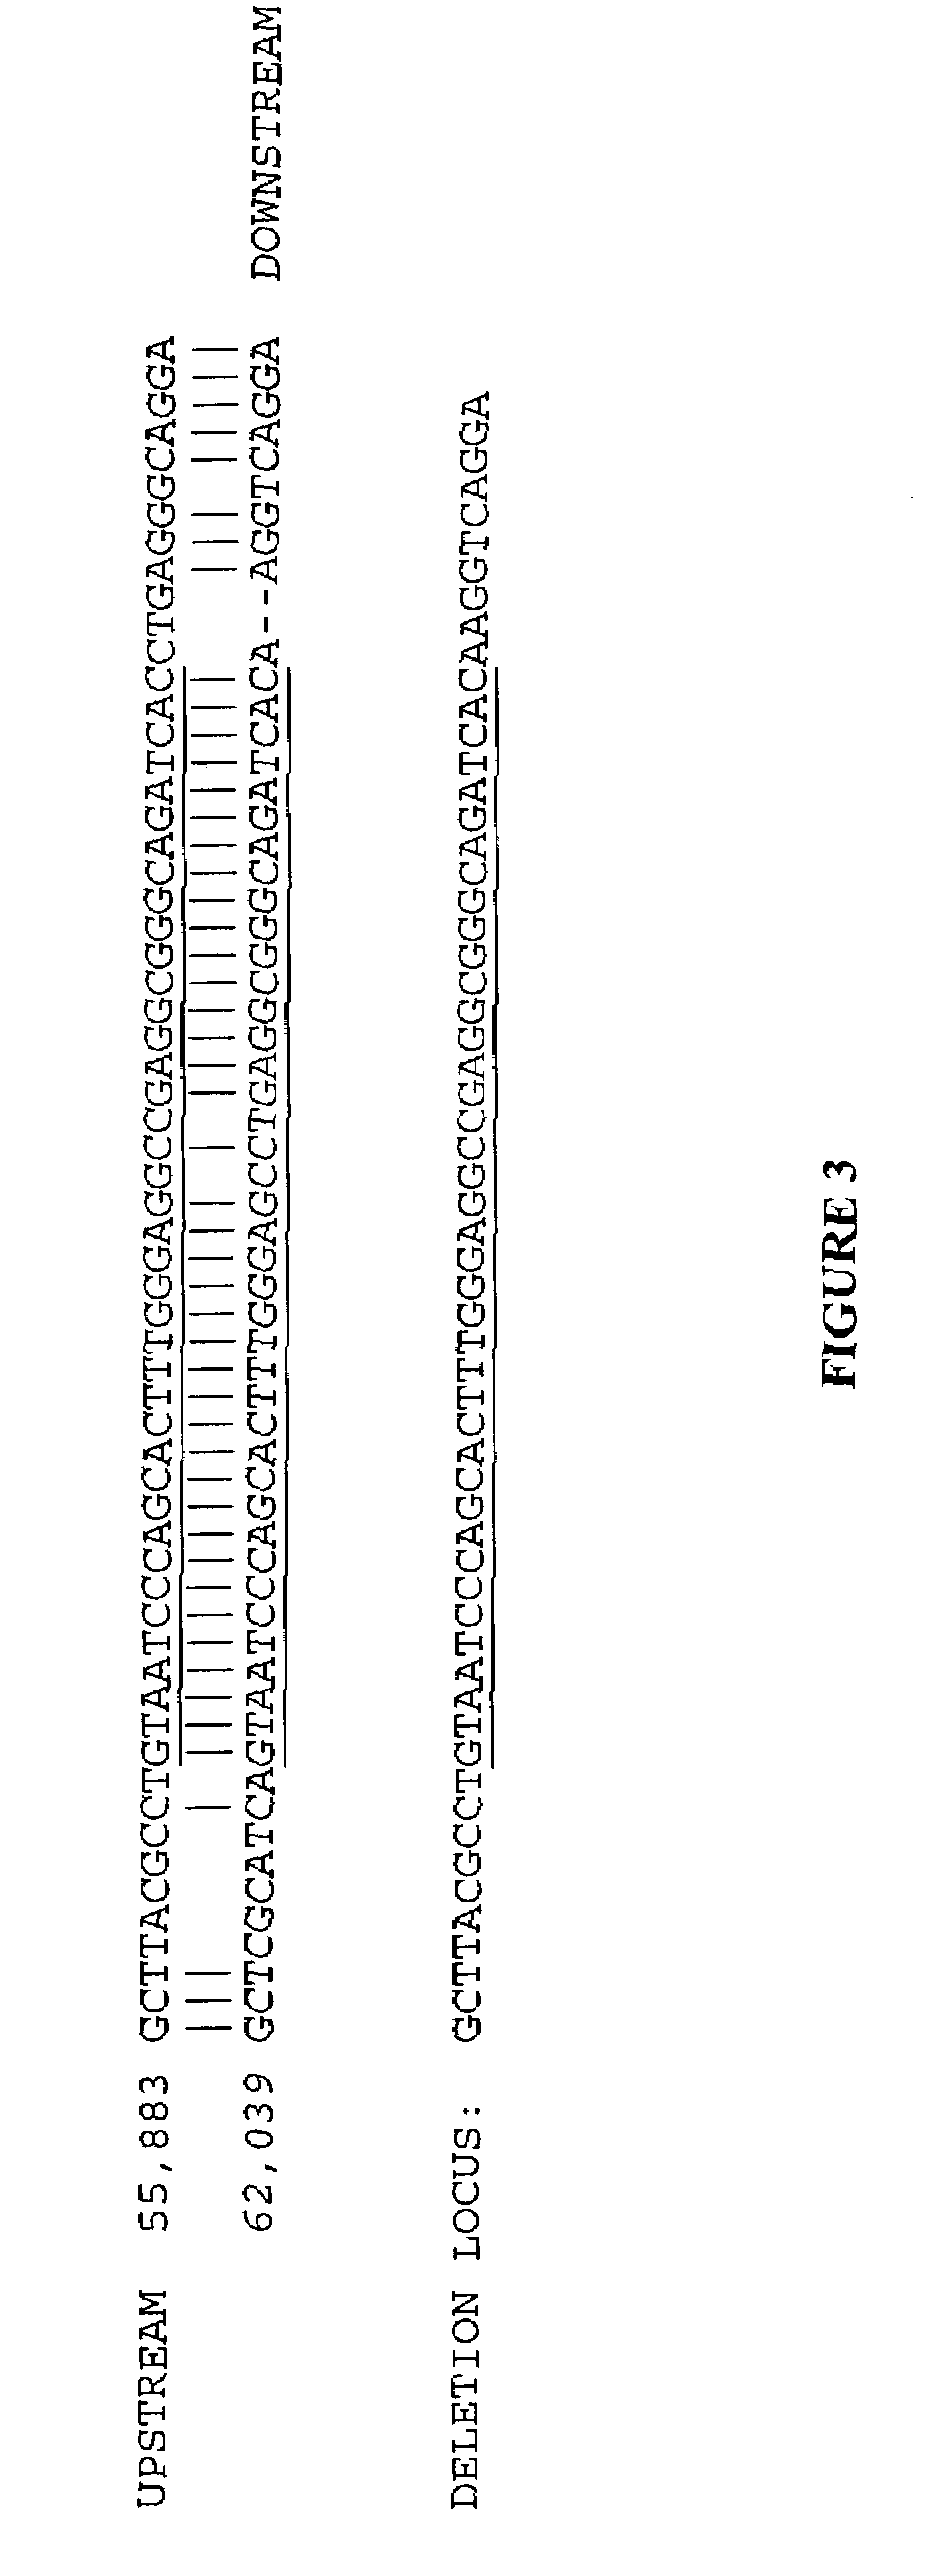 Large deletions in human BRCA1 gene and use thereof